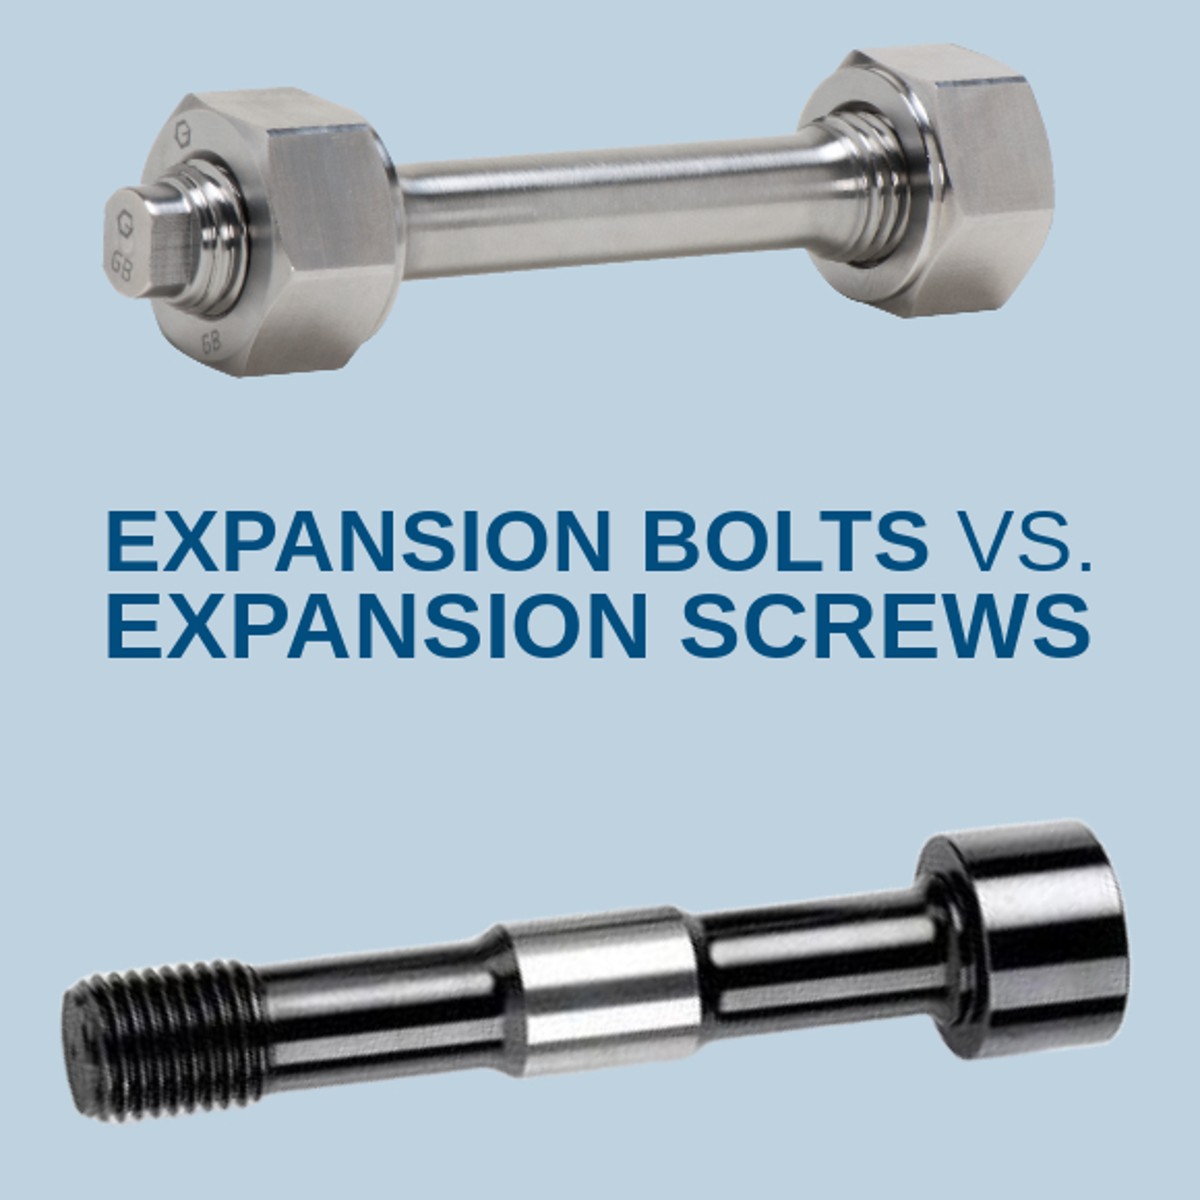 Difference between expansion bolts and expansion screws